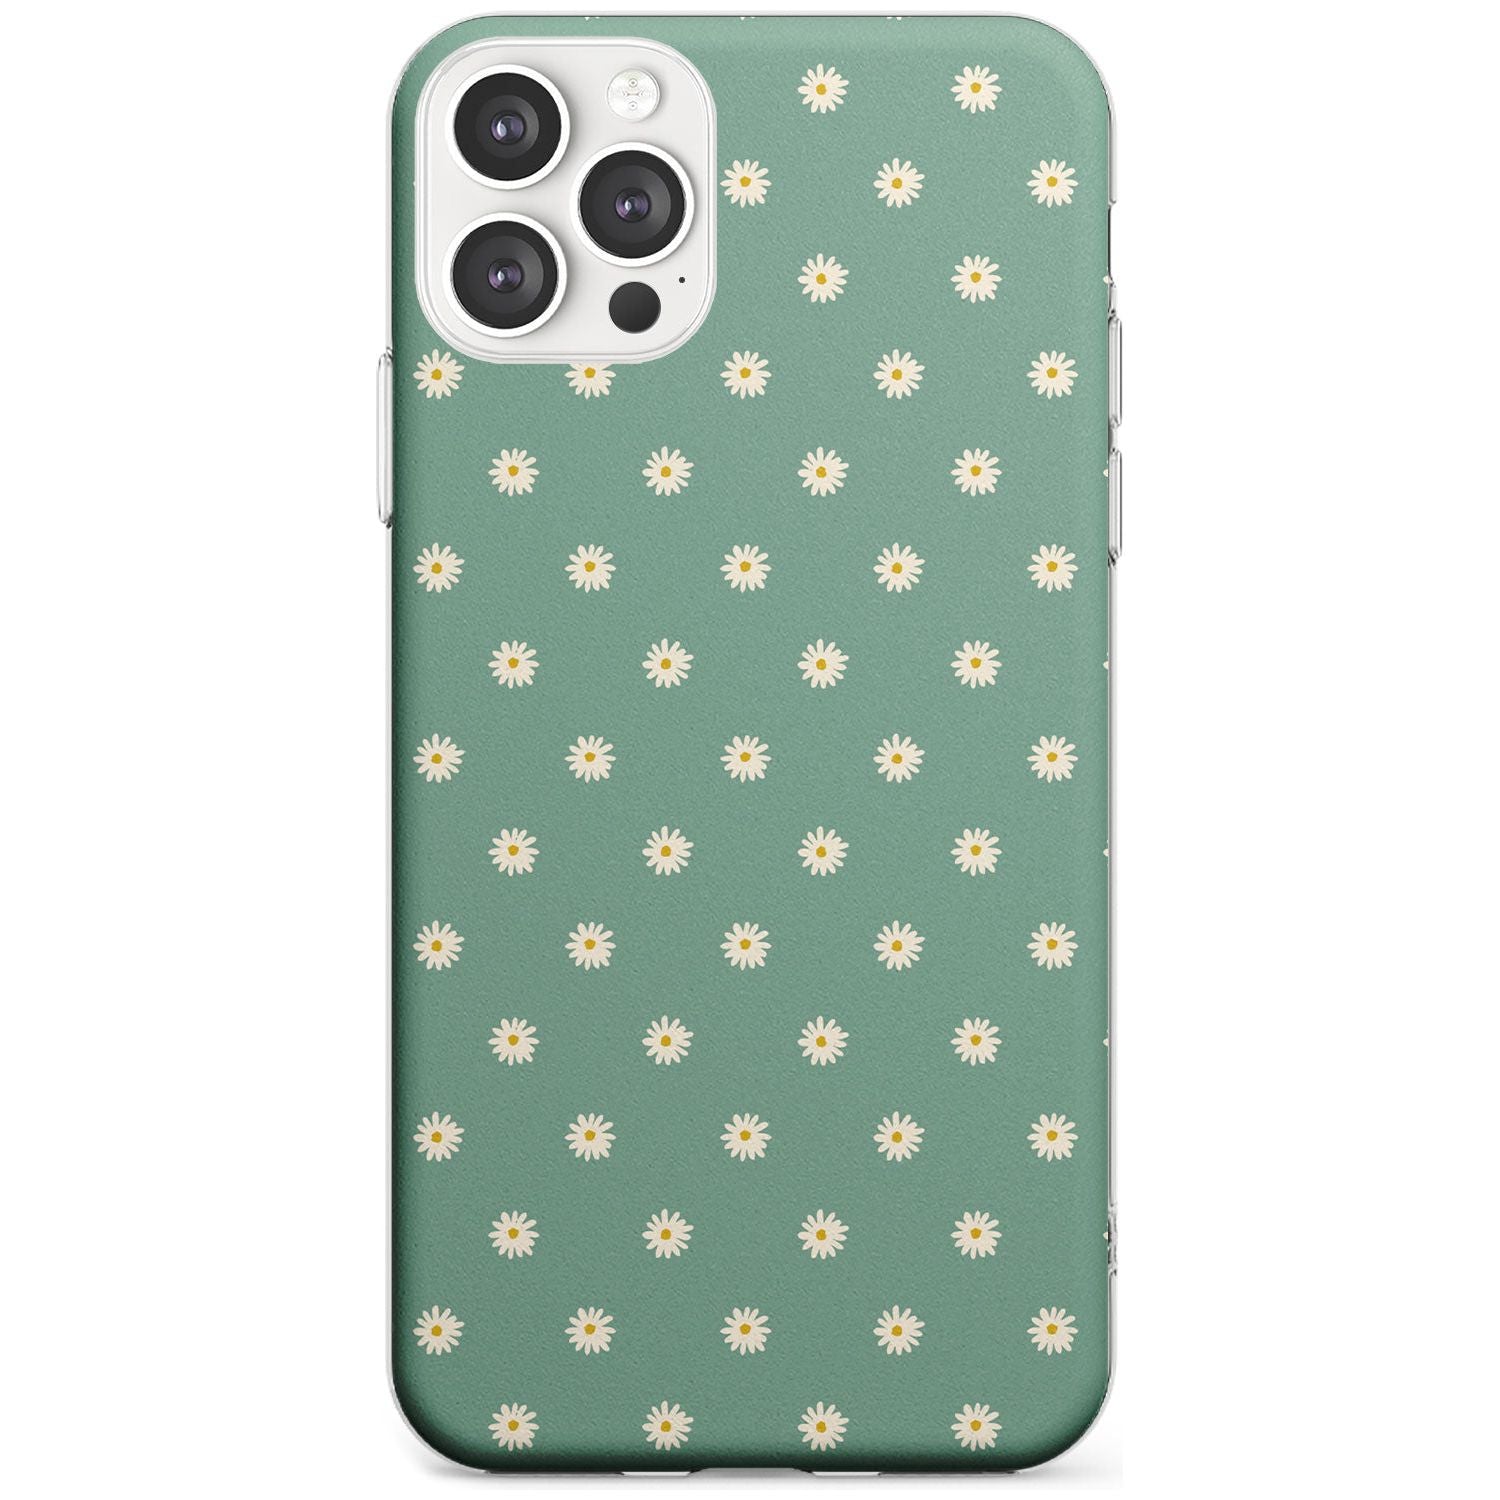 Daisy Pattern - Teal Cute Floral Daisy Design Black Impact Phone Case for iPhone 11 Pro Max